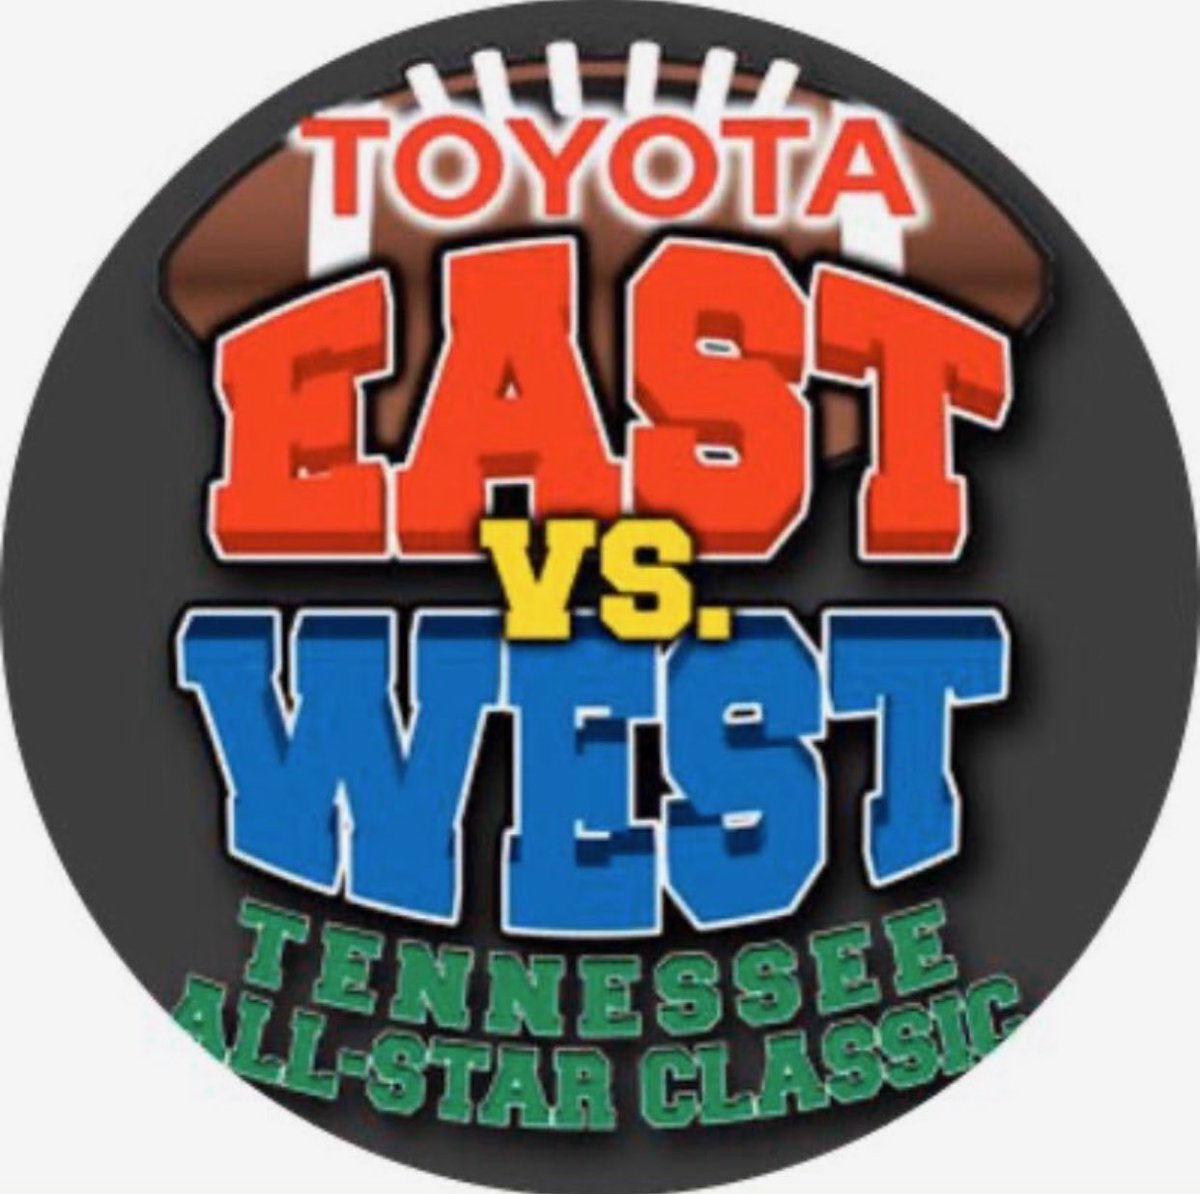 Excited to play in this years Tennessee East vs West all-star game @tnallstar @RecruitLHS @TNGridironScout